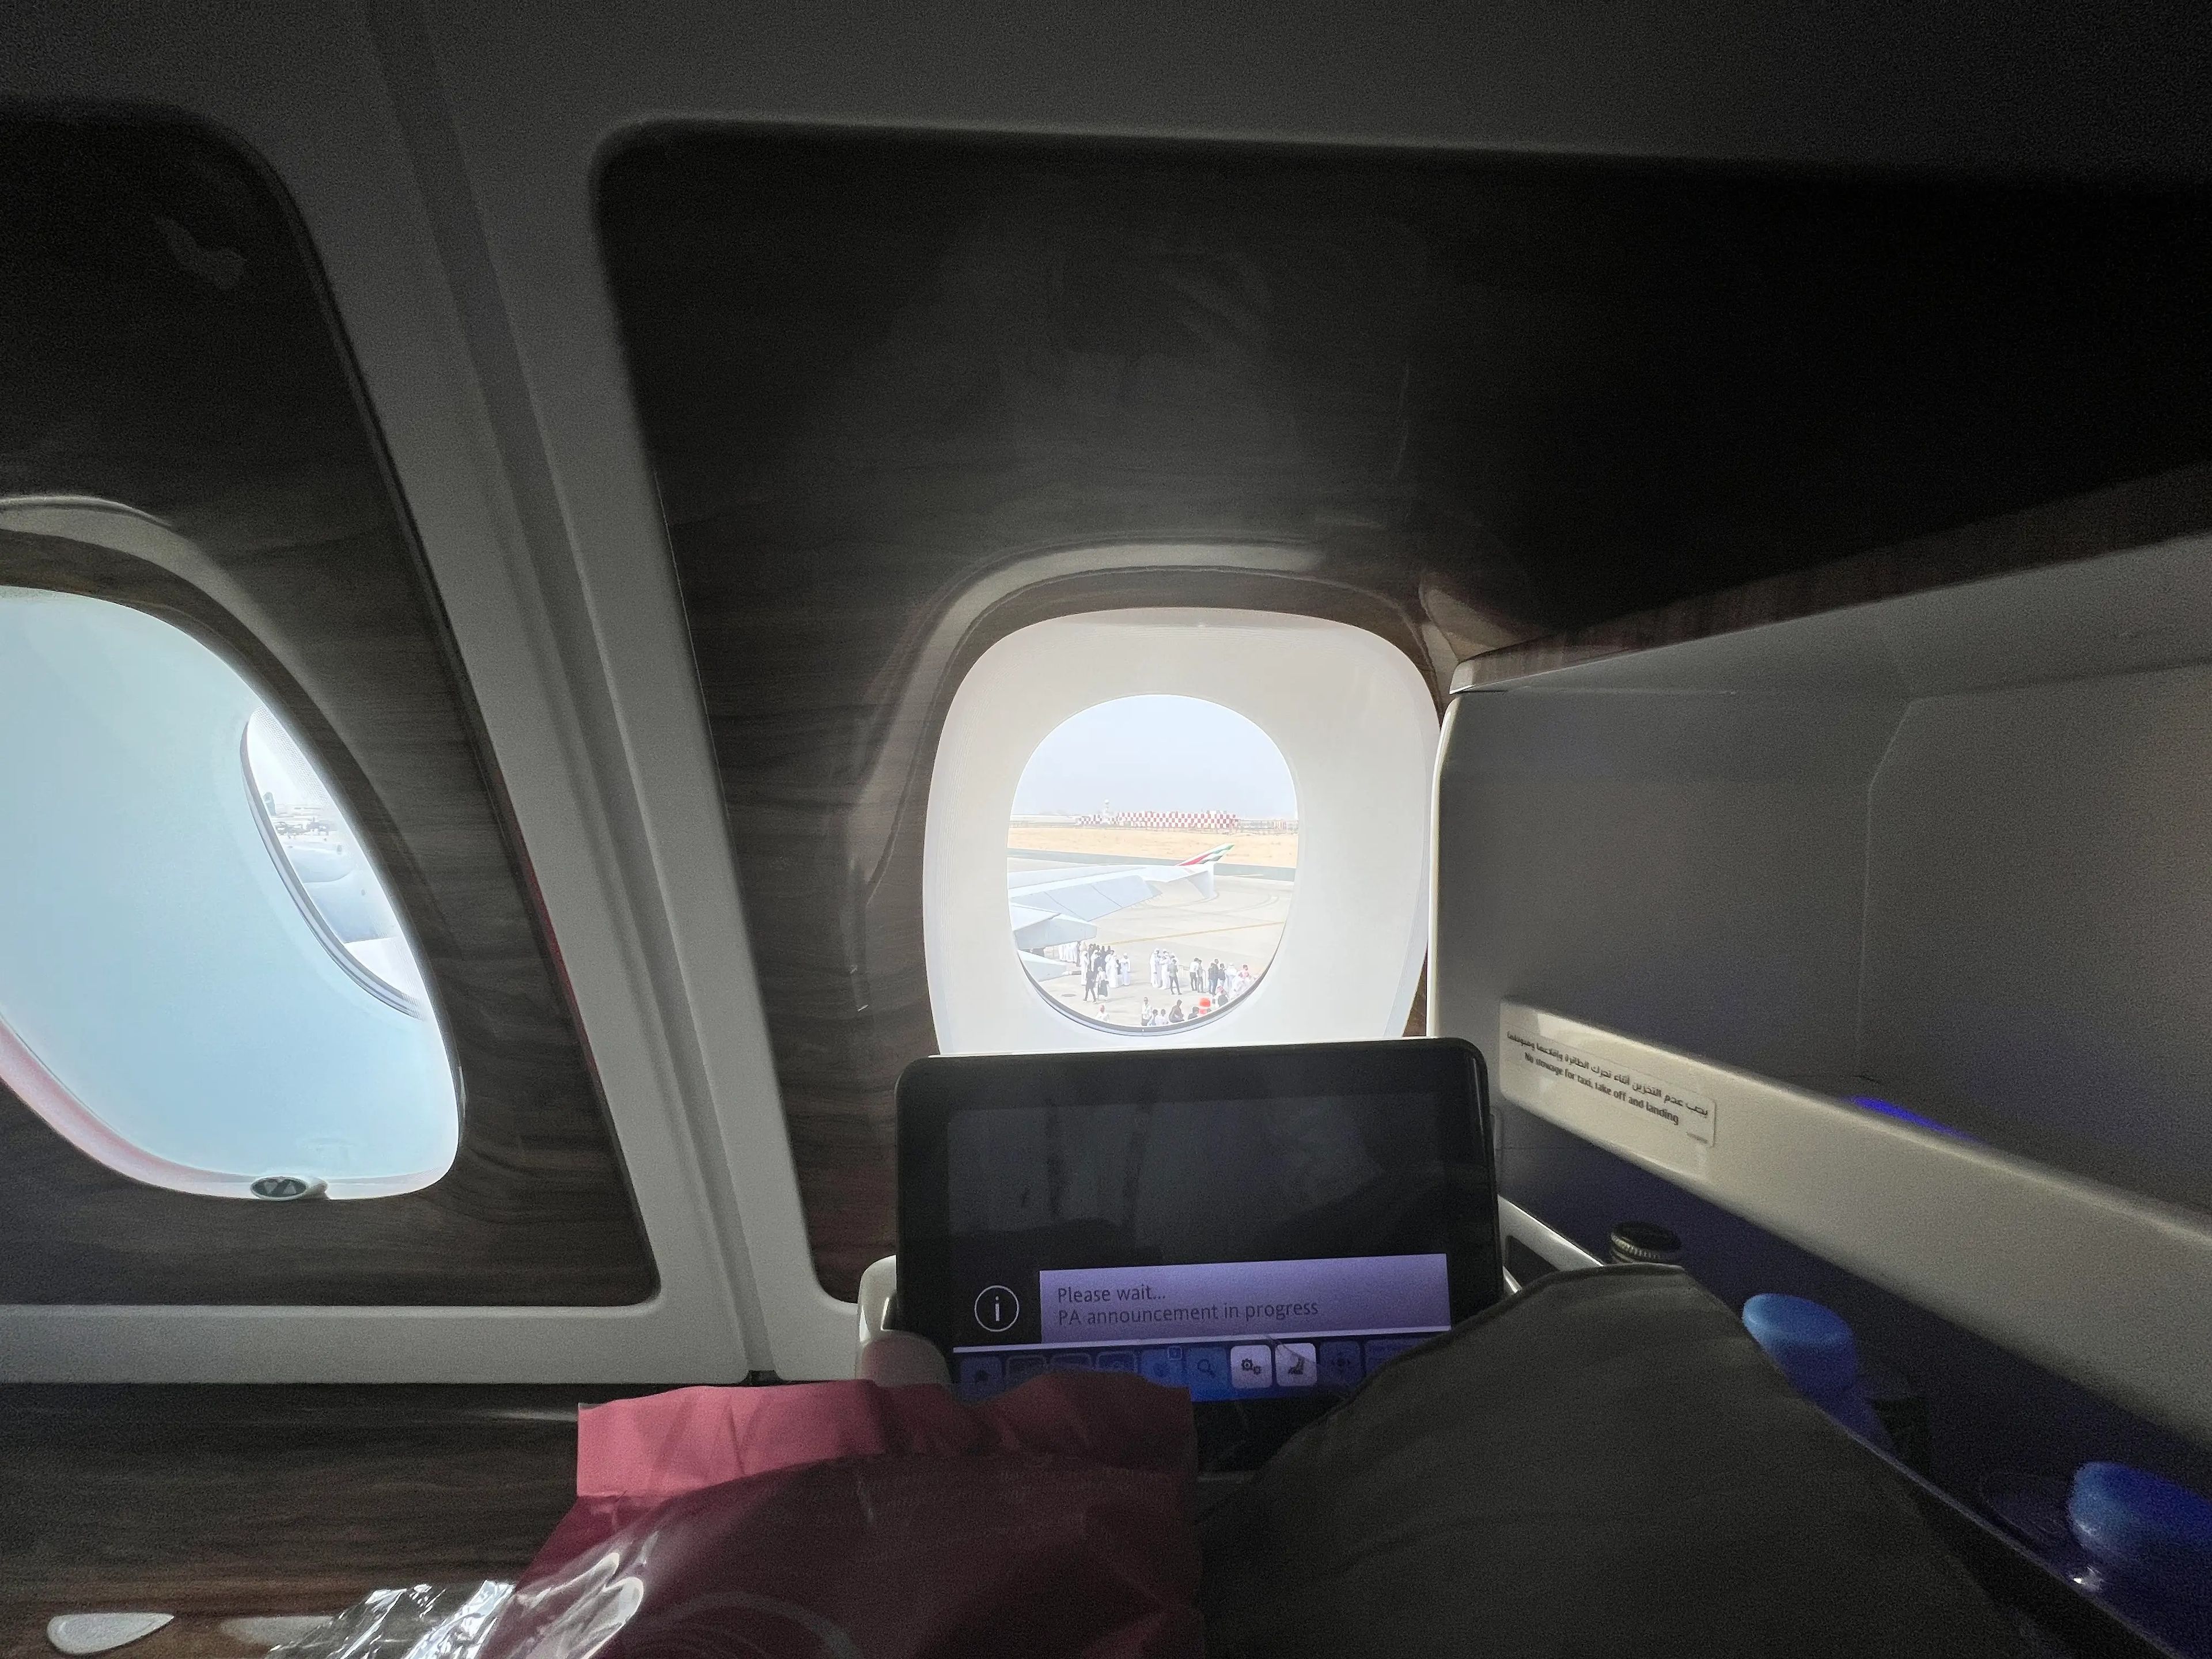 The view from the window on Emirates A380 business class, where the console is in the way.